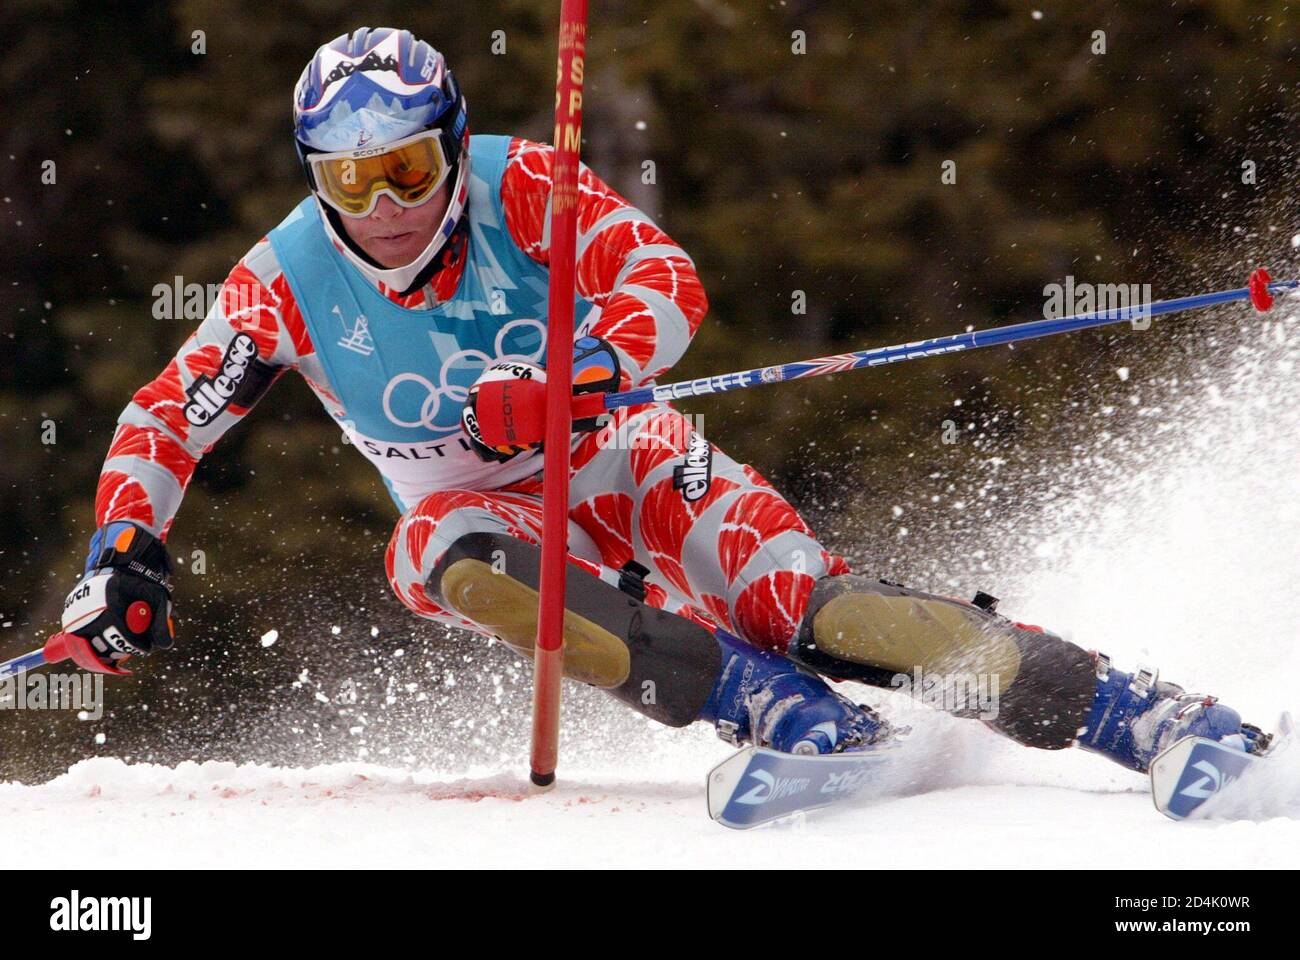 Jean-Pierre Vidal of France skis the second run of the men's slalom at the  Salt Lake City 2002 Winter Olympic Games, in Deer Valley February 23, 2002.  Vidal won Olympic gold in